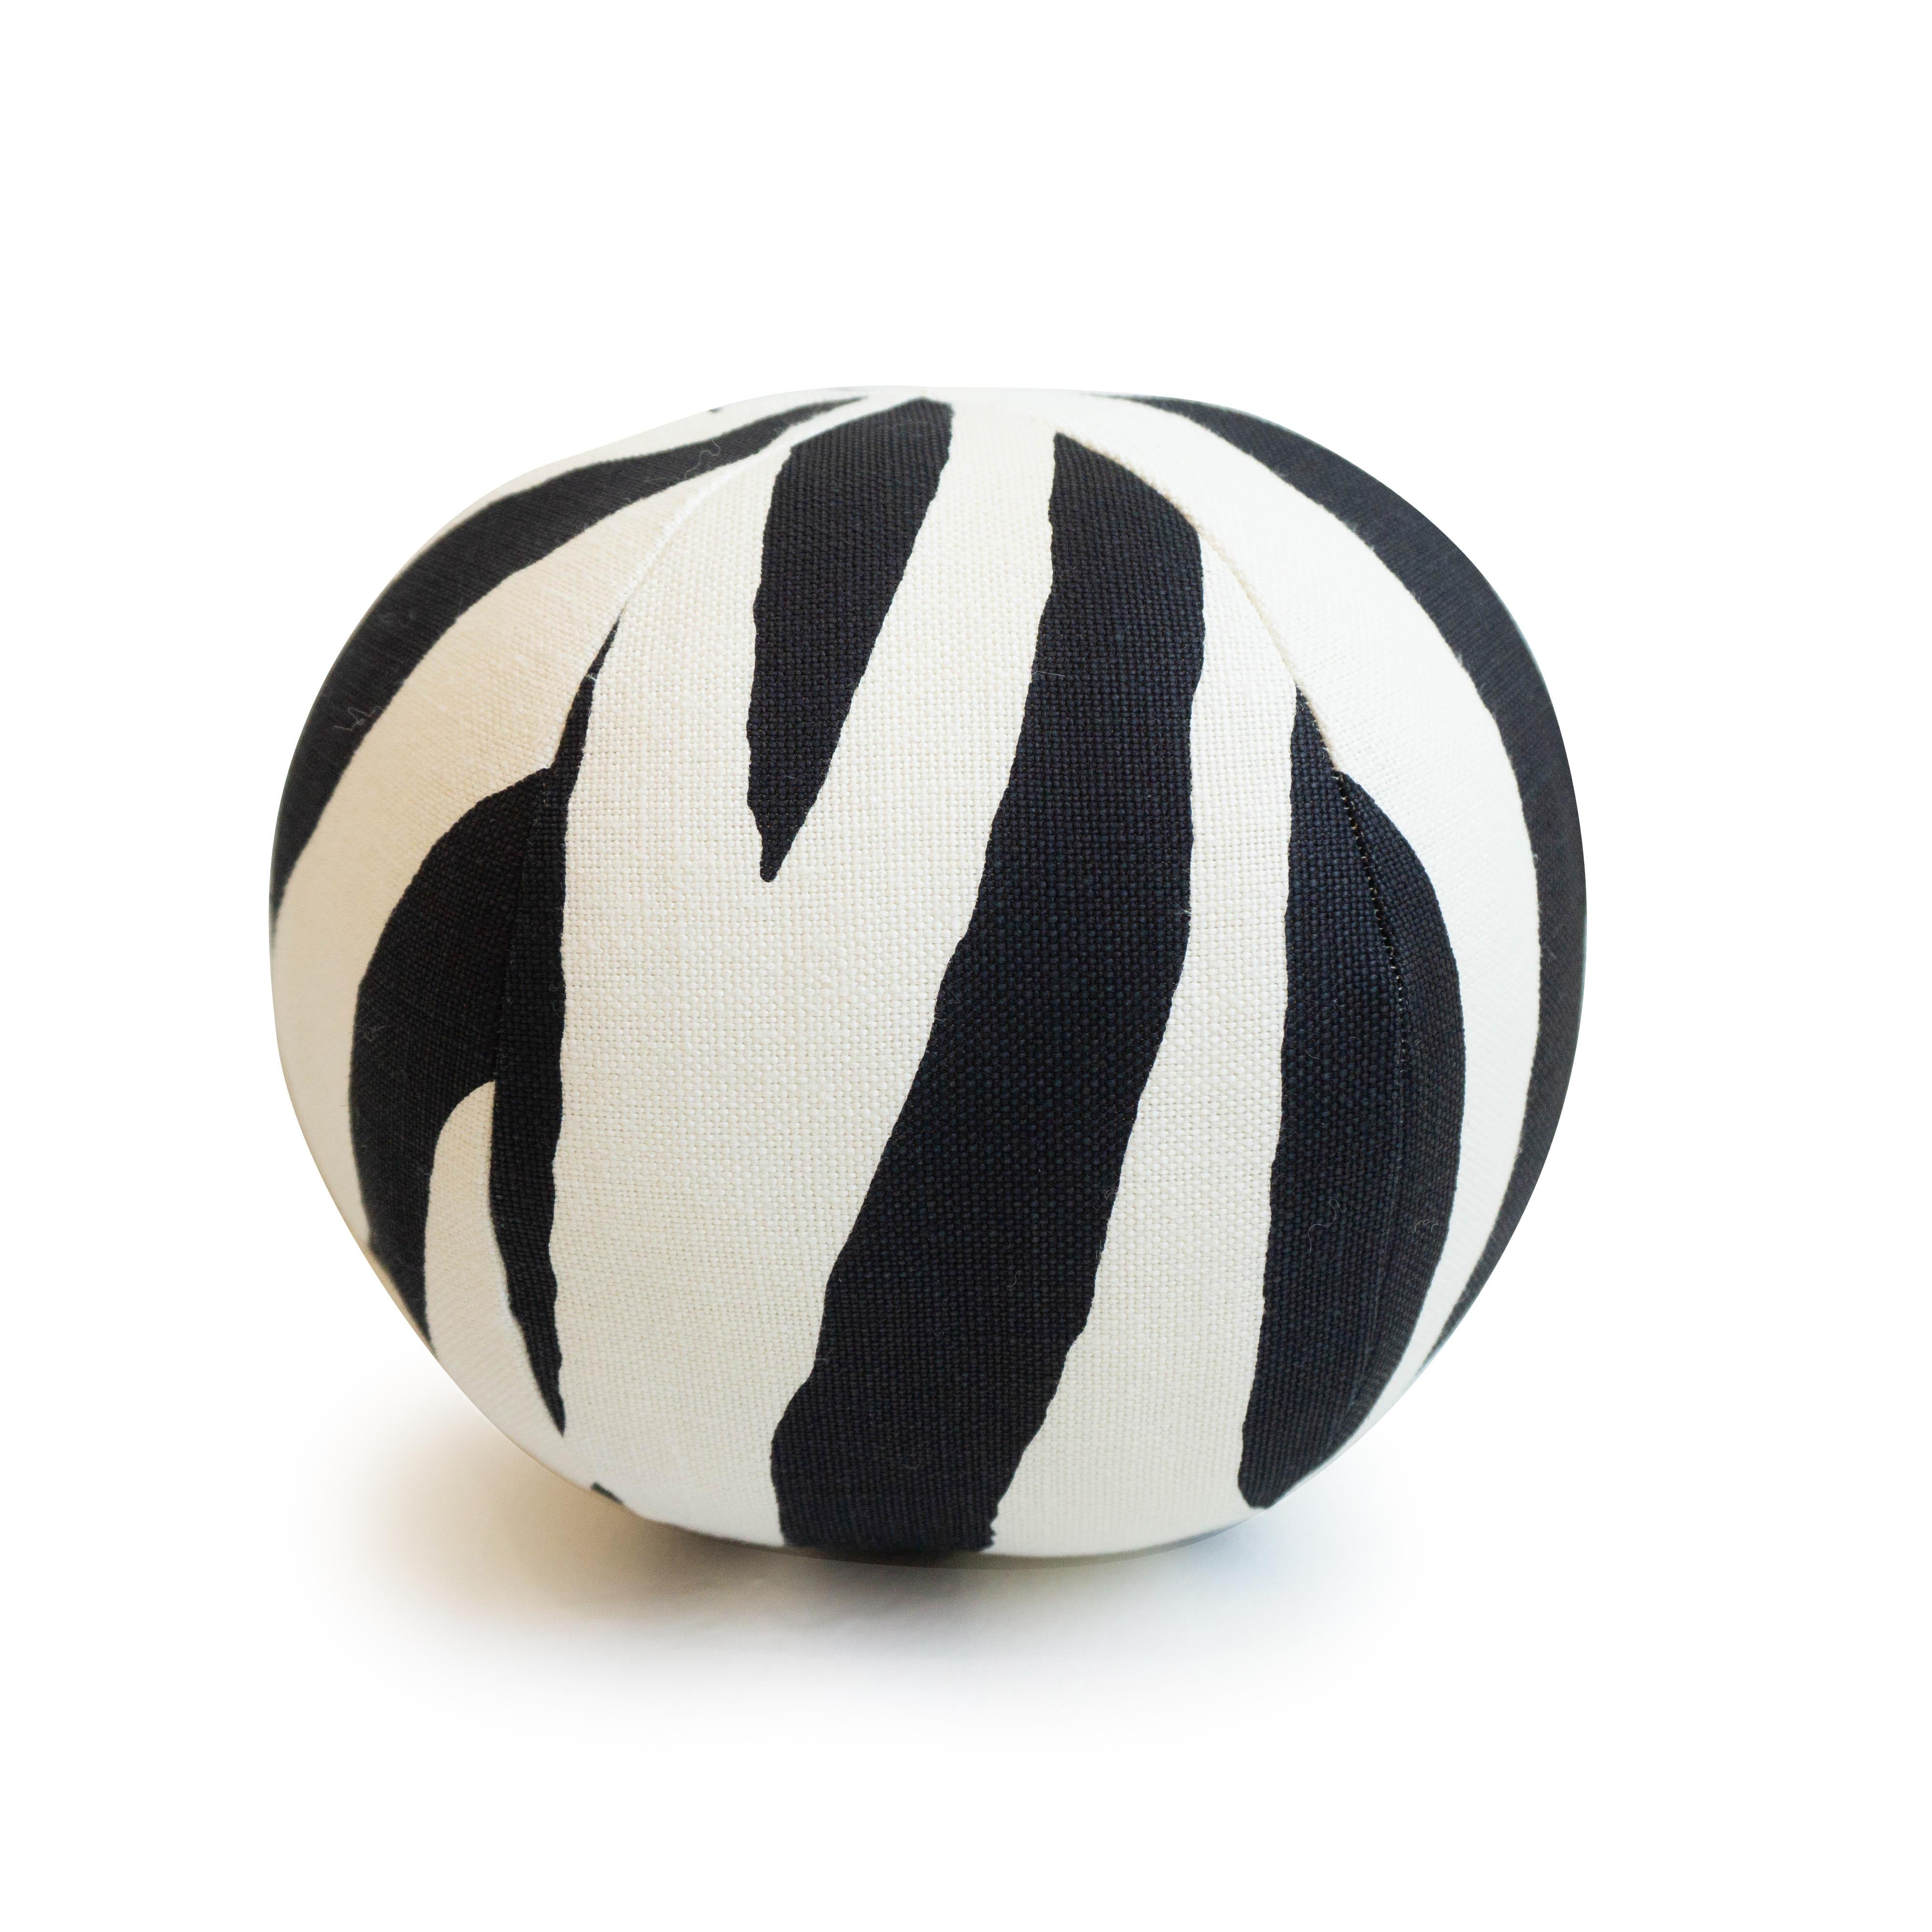 A handmade round ball throw pillow in a zebra print fabric. All pillows are hand sewn in our studio in Norwalk, Connecticut. 

Measurements: 10